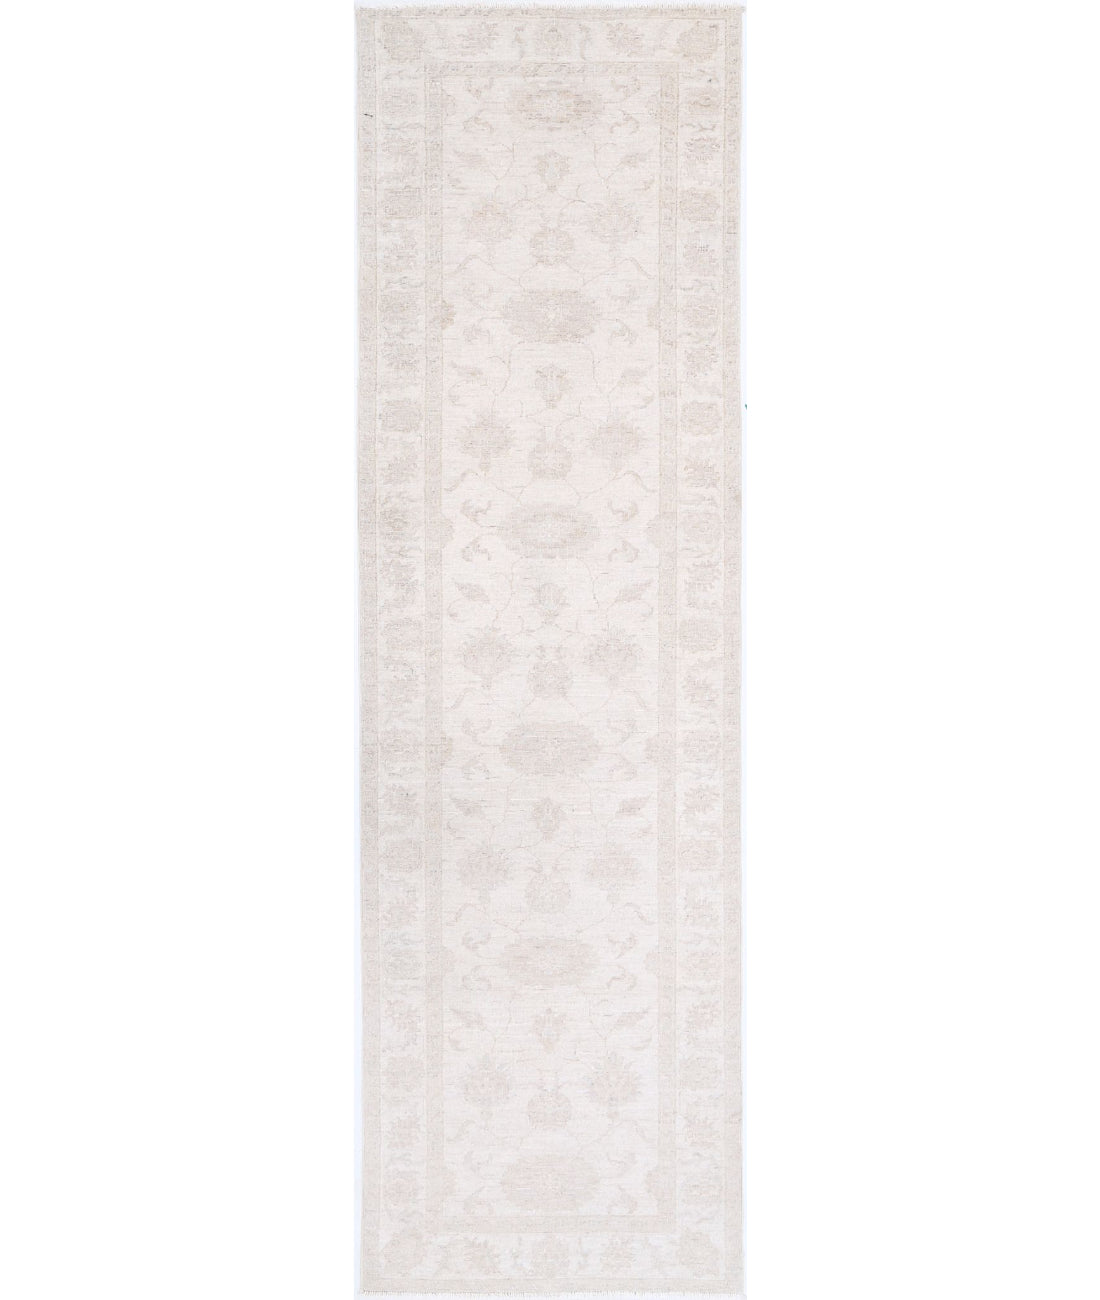 Hand Knotted Serenity Wool Rug - 2'6'' x 9'7'' 2'6'' x 9'7'' (75 X 288) / Ivory / Taupe